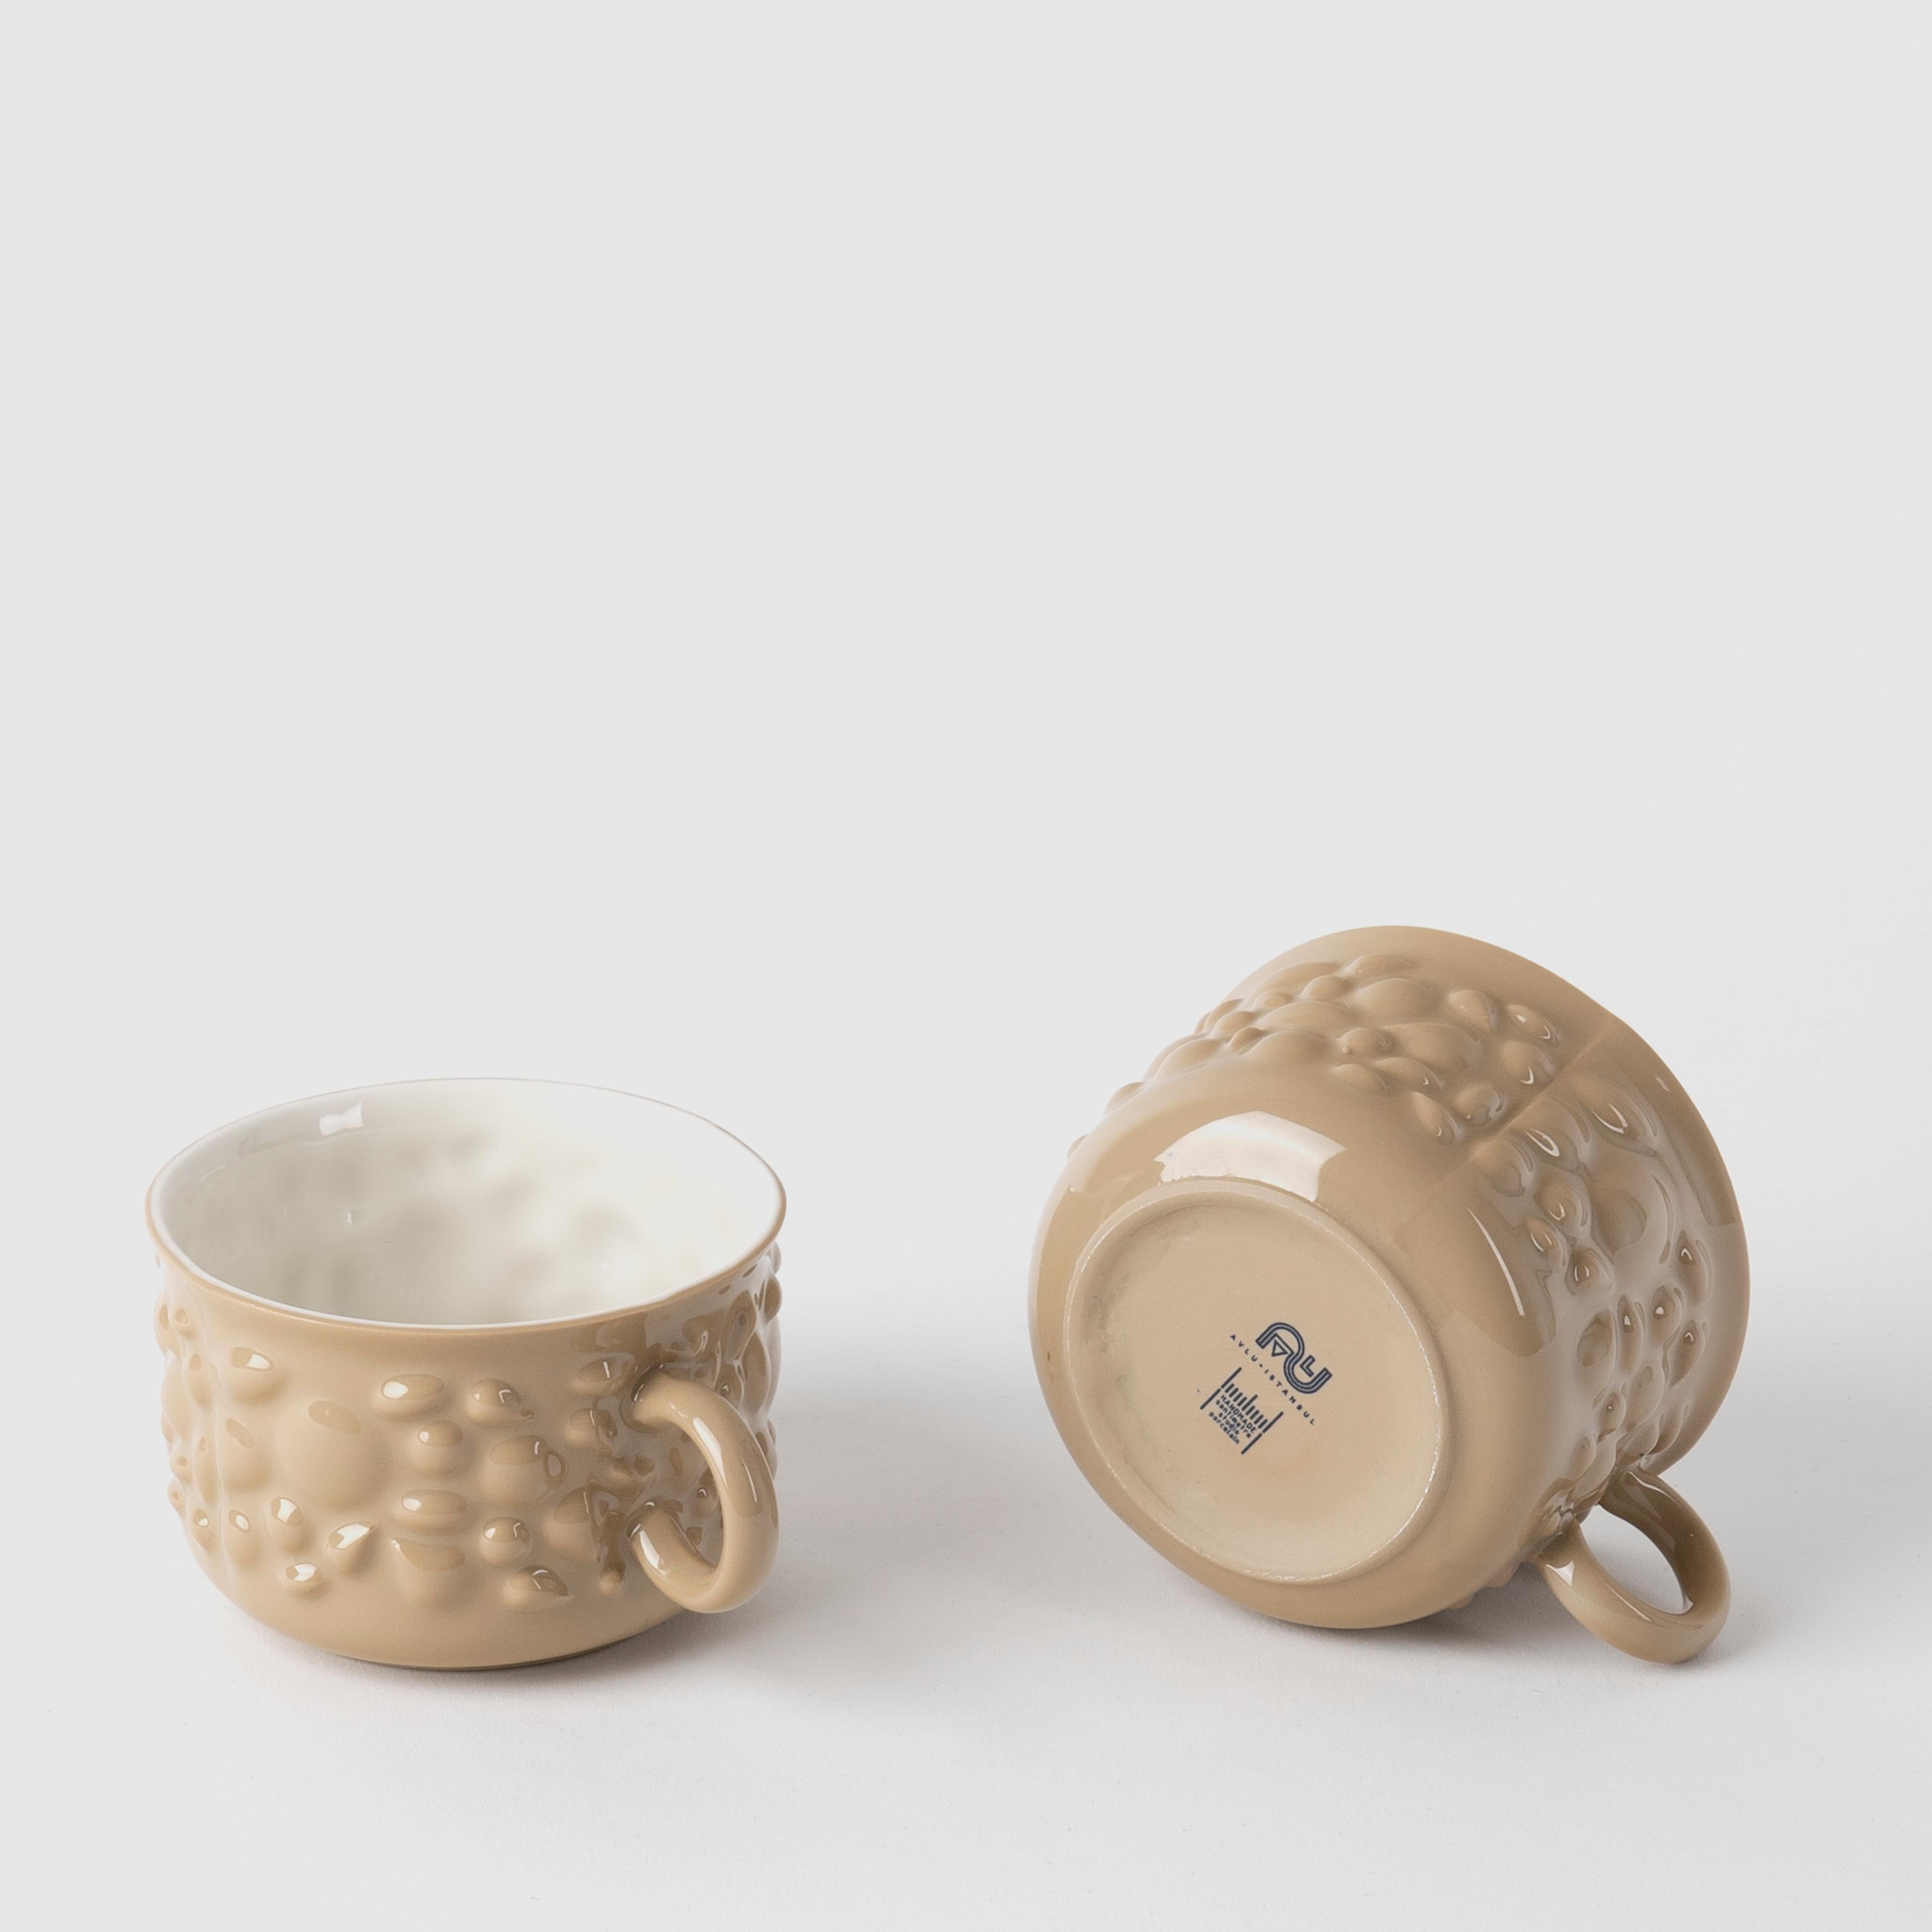 Justine porcelain pieces are inspired by the ancient Byzantine jewelry. Delicate porcelain transforms cups into timeless design objects by translating pearl and stone details of jewelry into flowing forms.

With their pastel colors and delicate